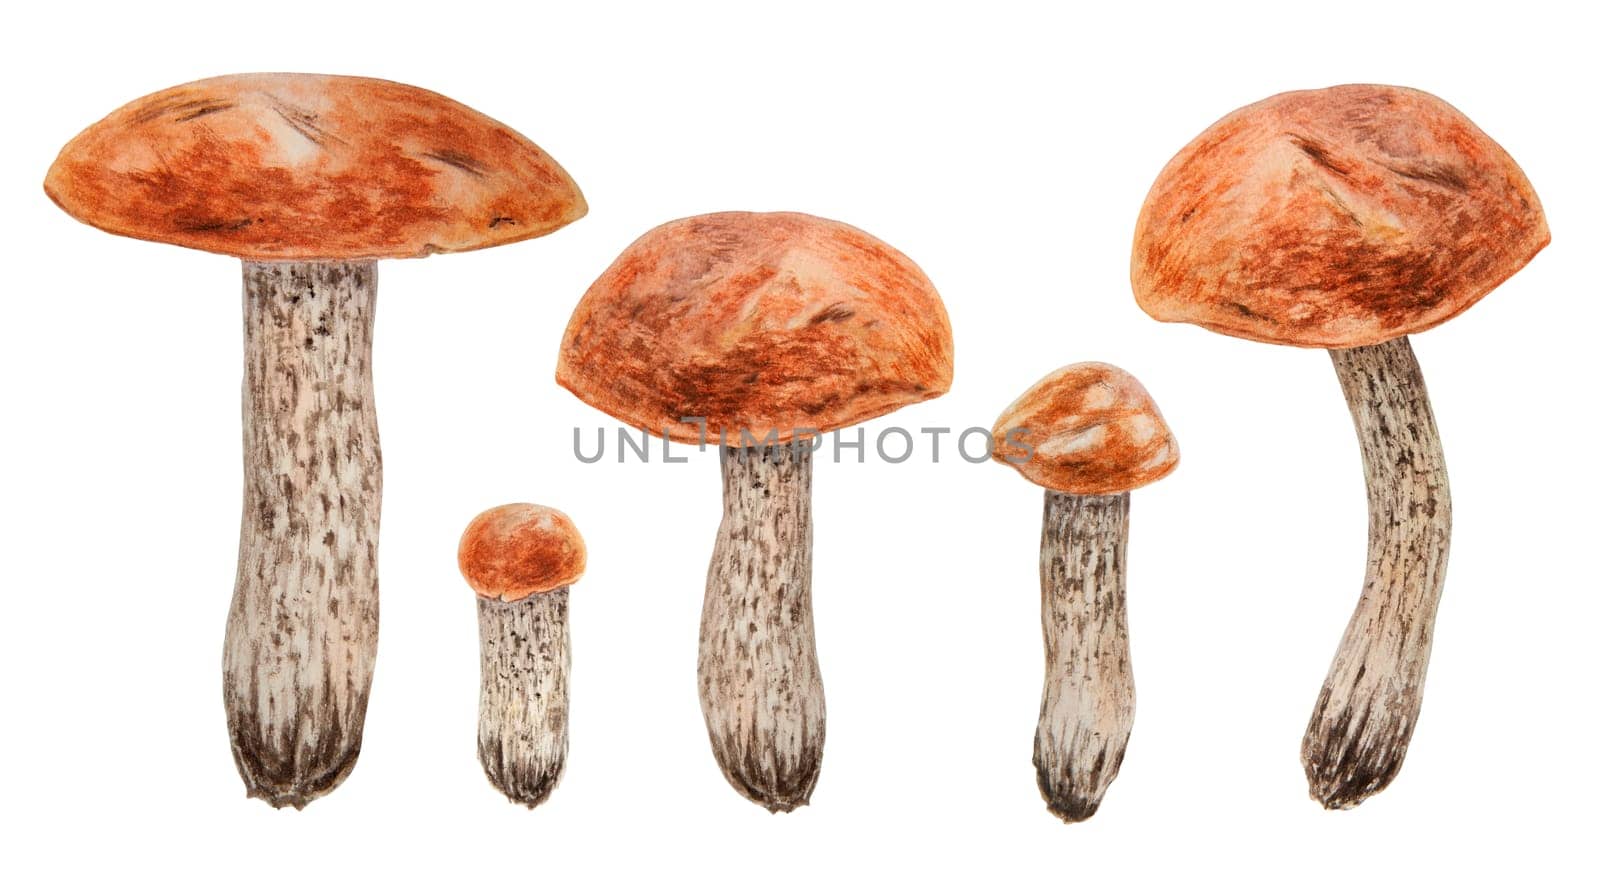 Wild edible mushrooms with red cap. Watercolor hand drawn botanical realistic illustrations. Forest boletus clip art. Set of paintings for fabric, postcards, invitations, menus, prints, packing paper by florainlove_art